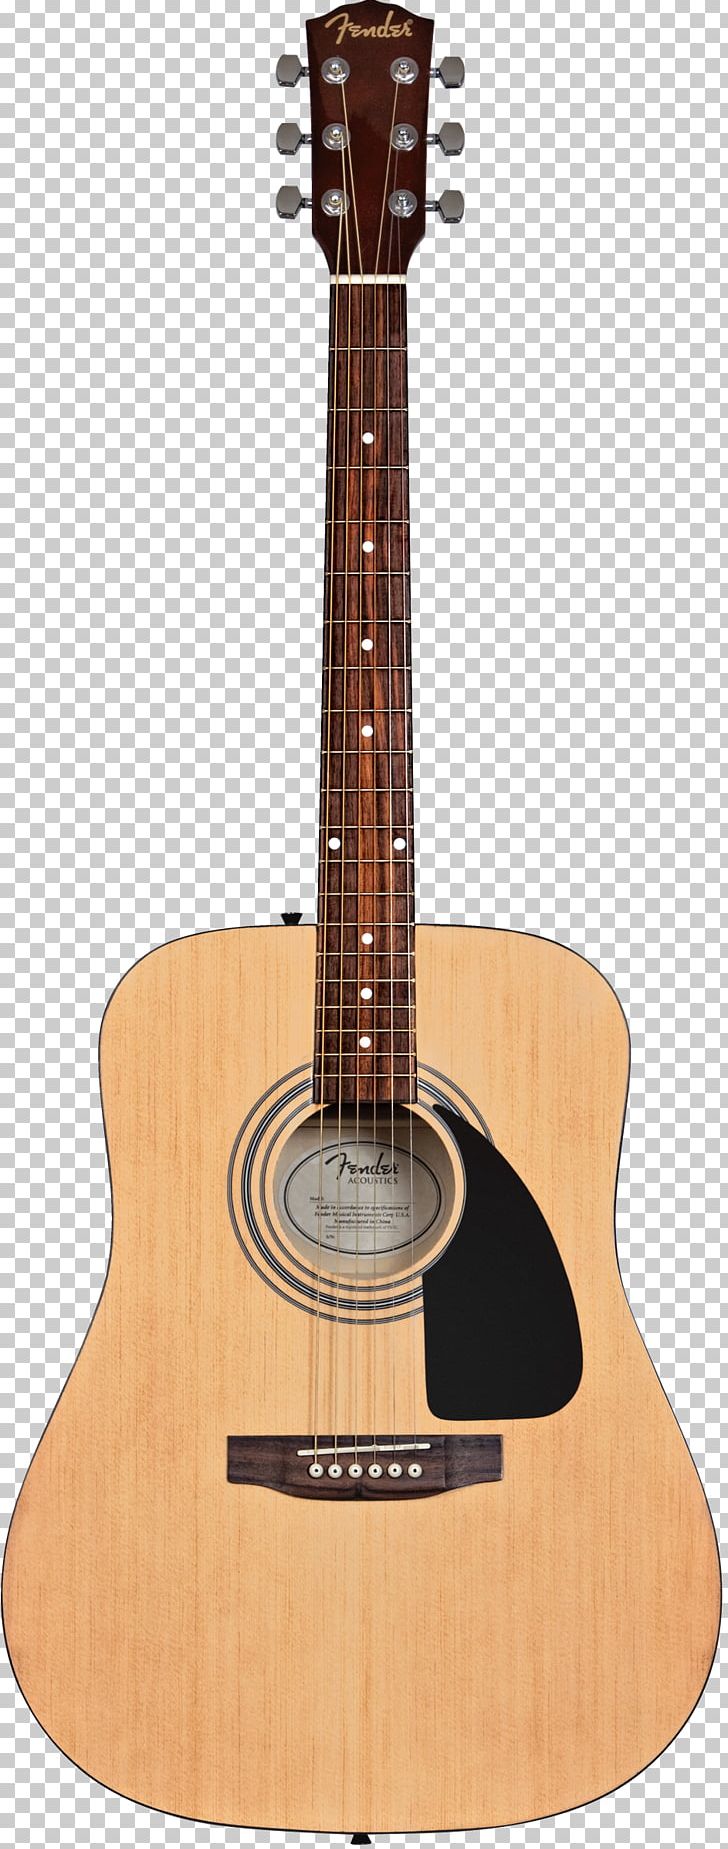 Fender Stratocaster Dreadnought Steel-string Acoustic Guitar PNG, Clipart, Aco, Acoustic Electric Guitar, Cuatro, Cutaway, Guitar Free PNG Download